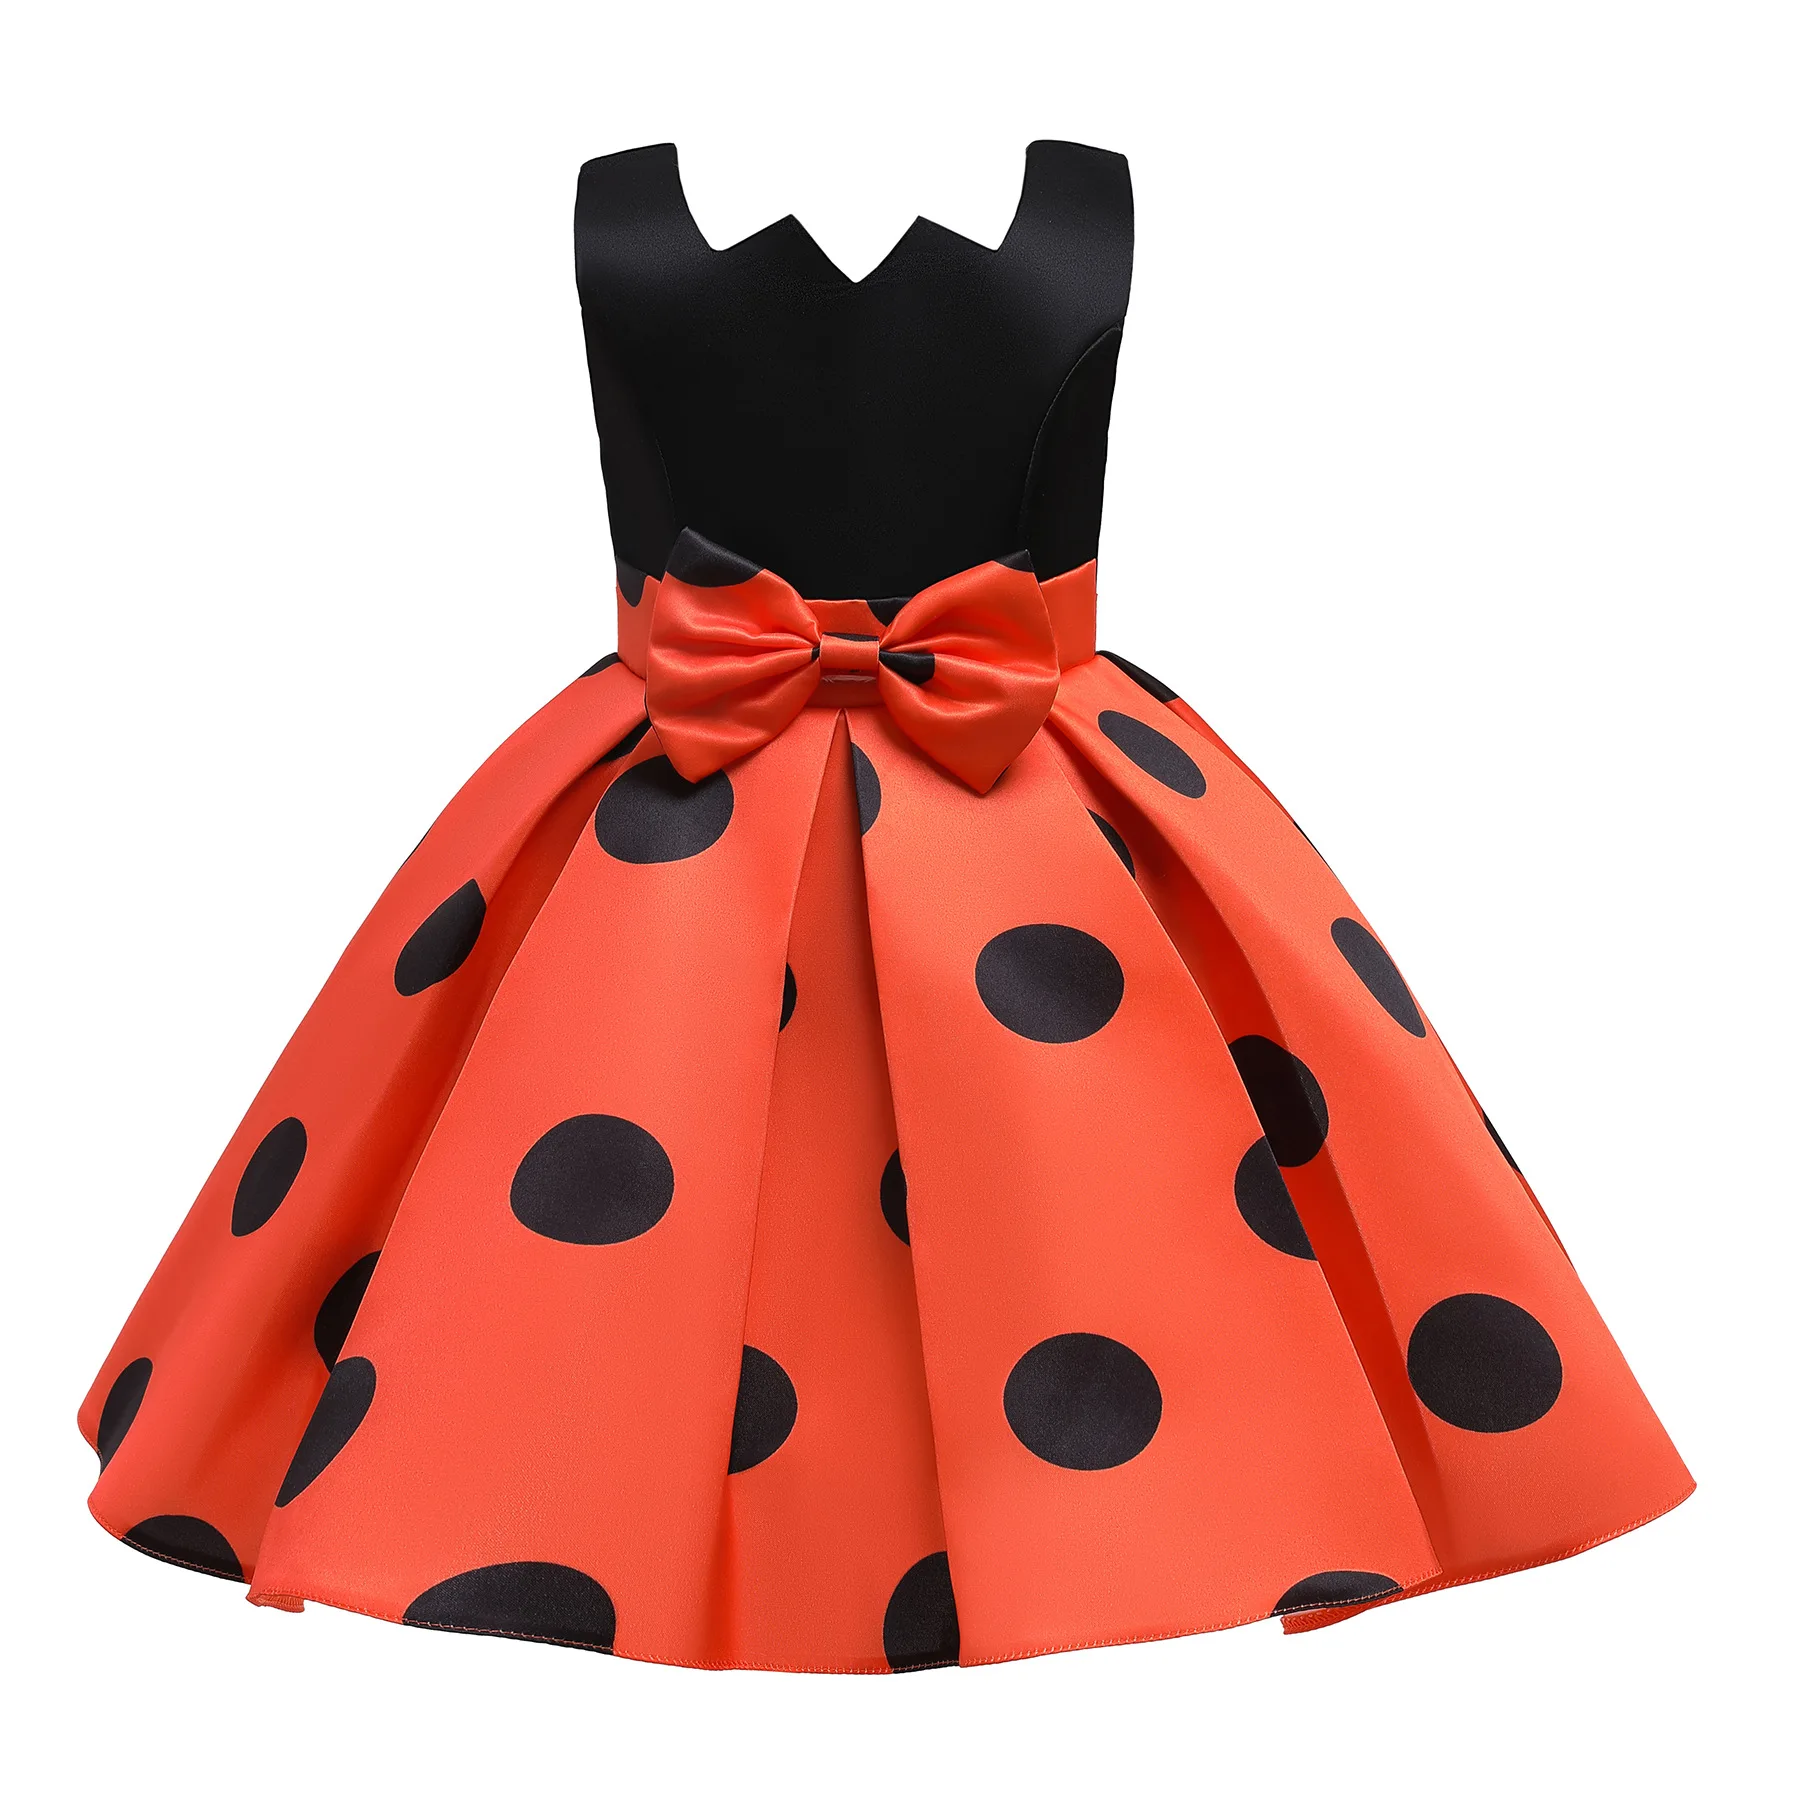 

Red Orange Baby Kids Dresses Girls Fancy Polka Dot Carnival Costumes Girls Cosplay Clothes Party Evening Occasions Halloween